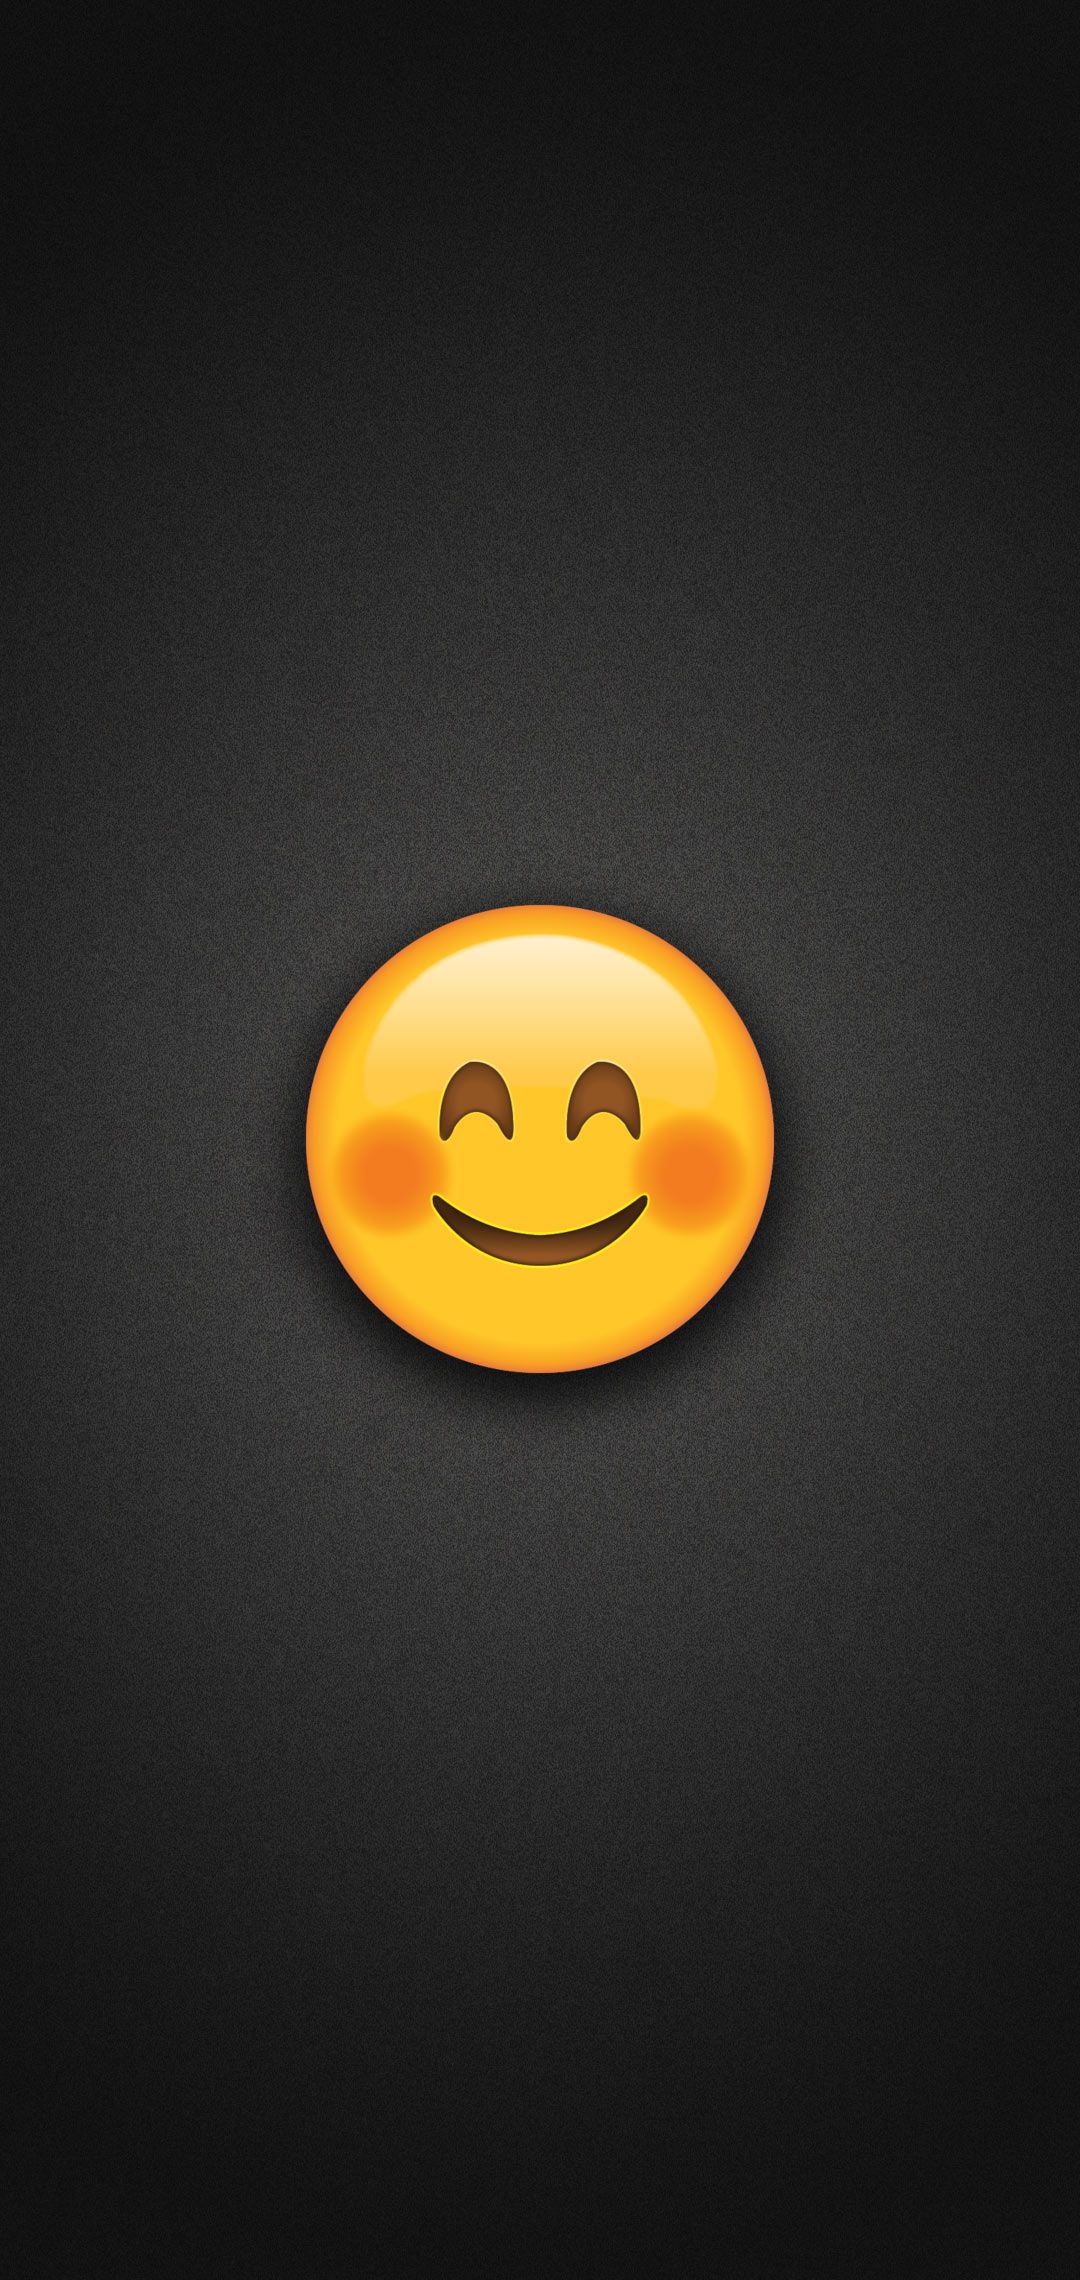 Smiling Face Emoji with Blushed Cheeks Phone Wallpaper